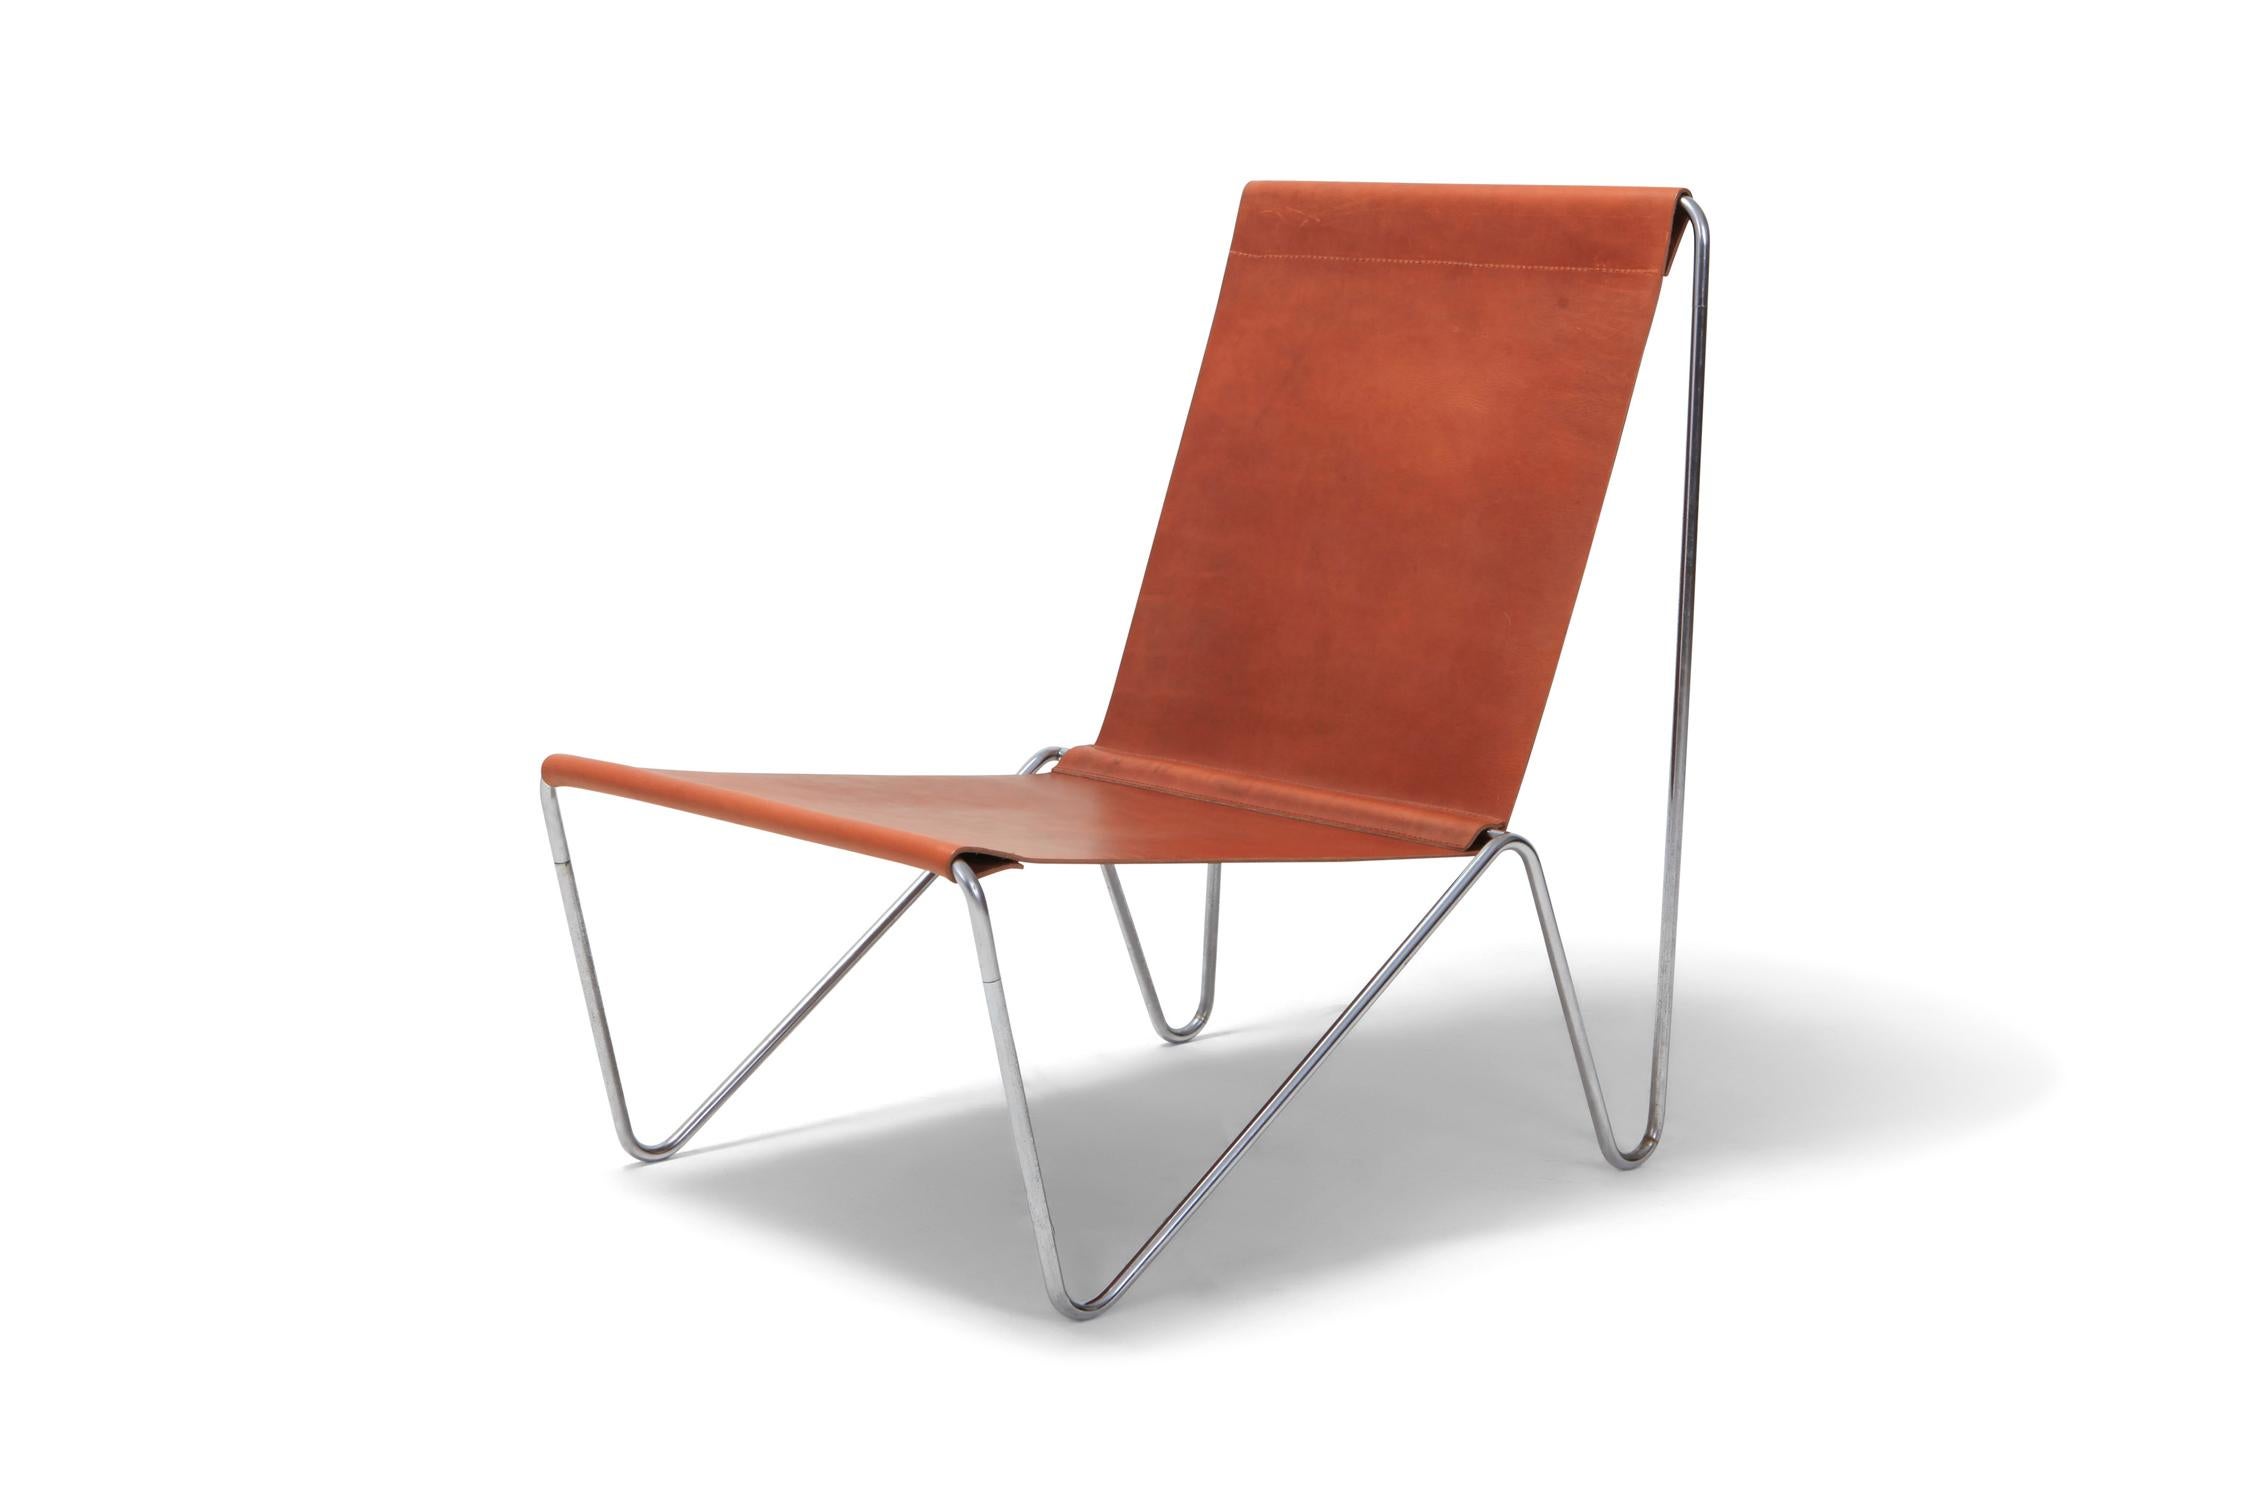 Fritz Hansen manufactured easy chair by Verner Panton.

A minimal tubular steel frame with suspended cognac leather.

Verner's first world famous design.

Model 3350
Manufactured by Fritz Hansen. 

Denmark, 1953.
 